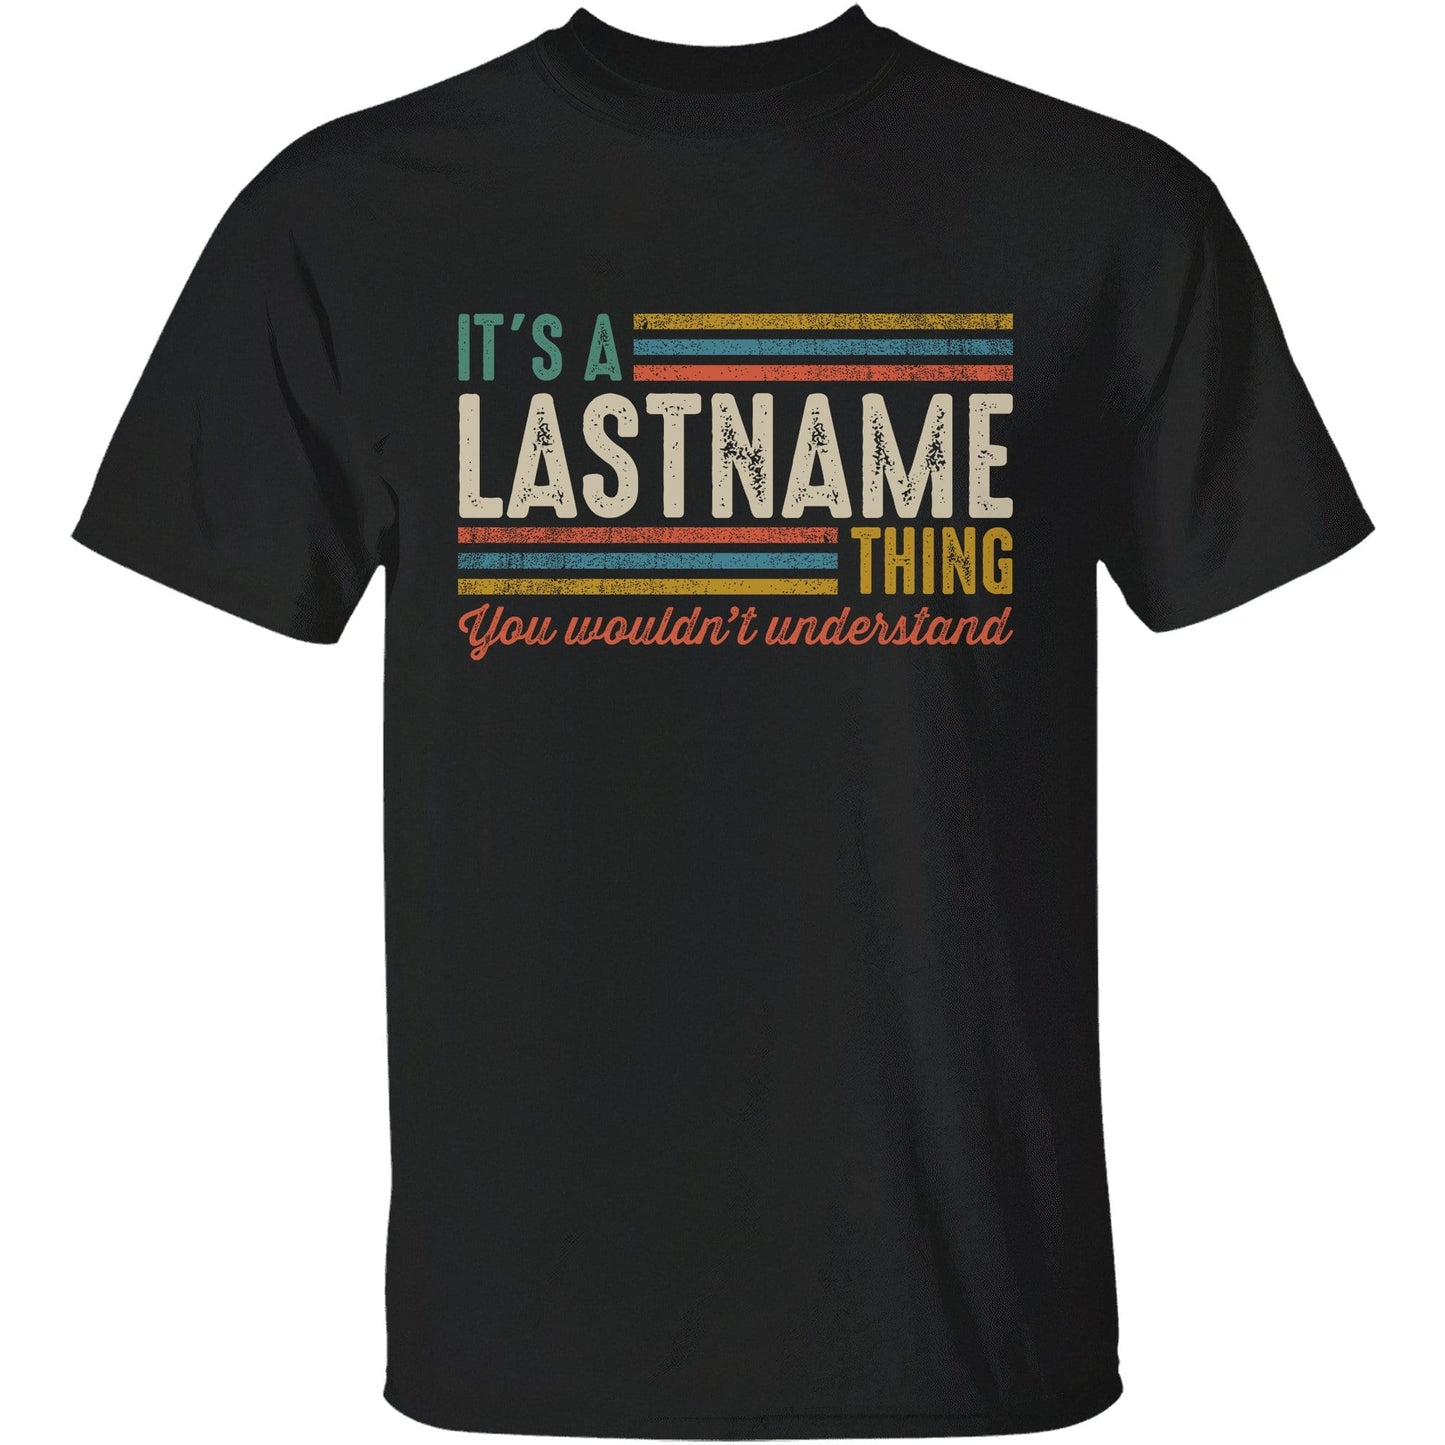 It’s A Last Name Thing You Wouldn’t Understand, Funny Custom Shirt, Self Gift-Macorner